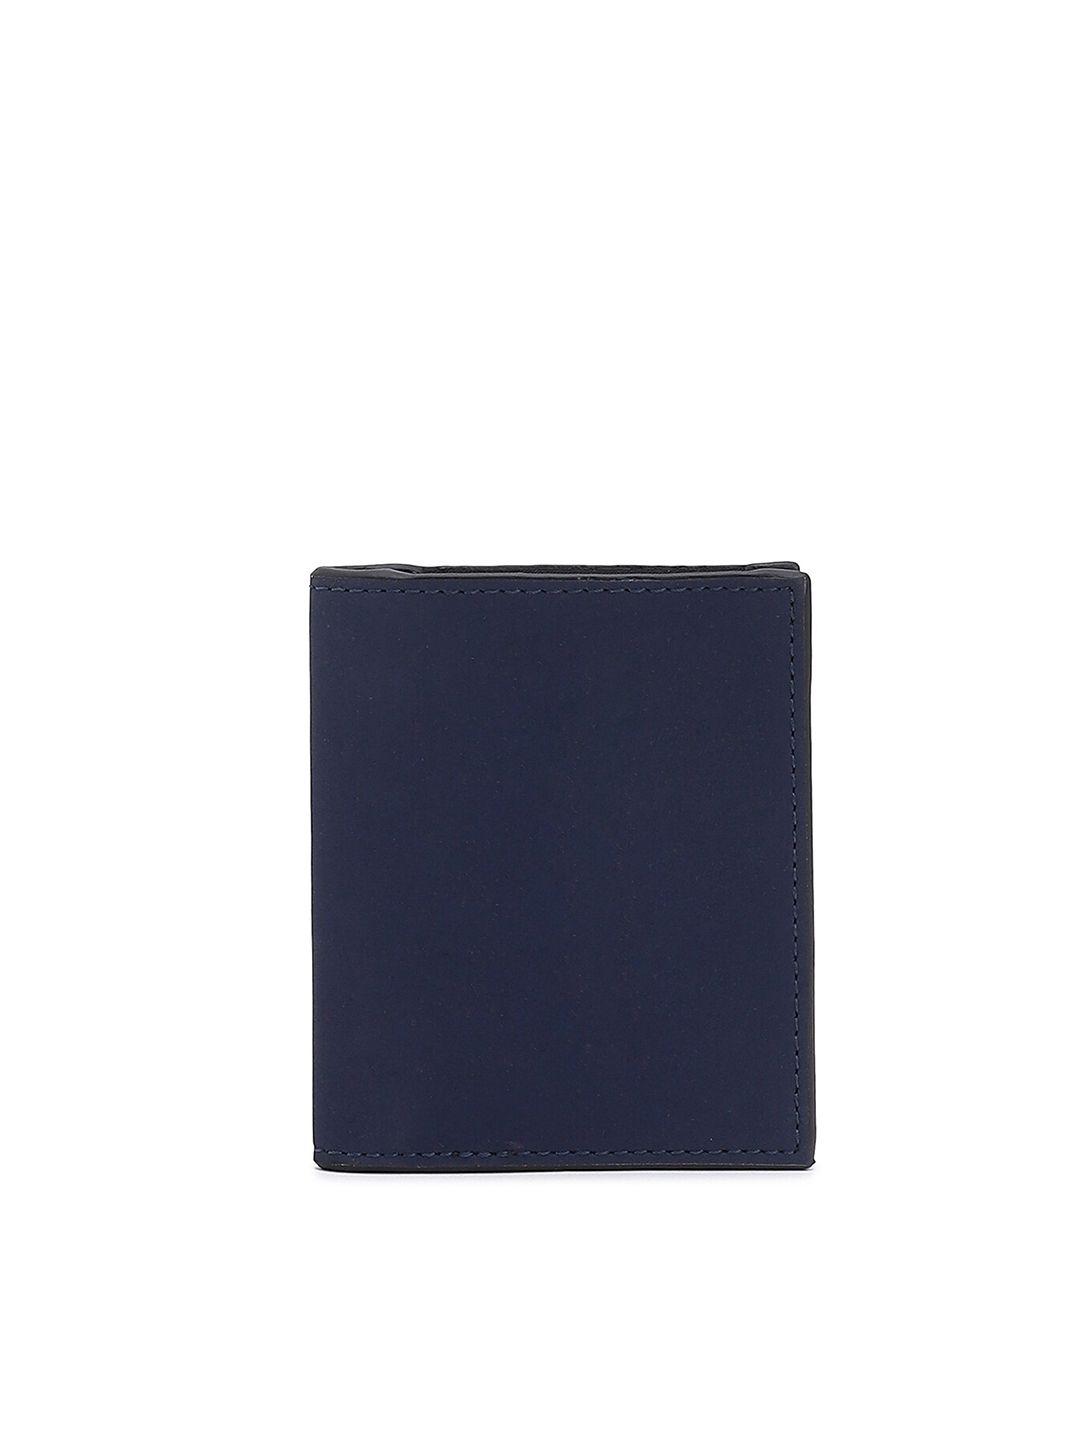 forever-21-women-navy-blue-pu-two-fold-wallet